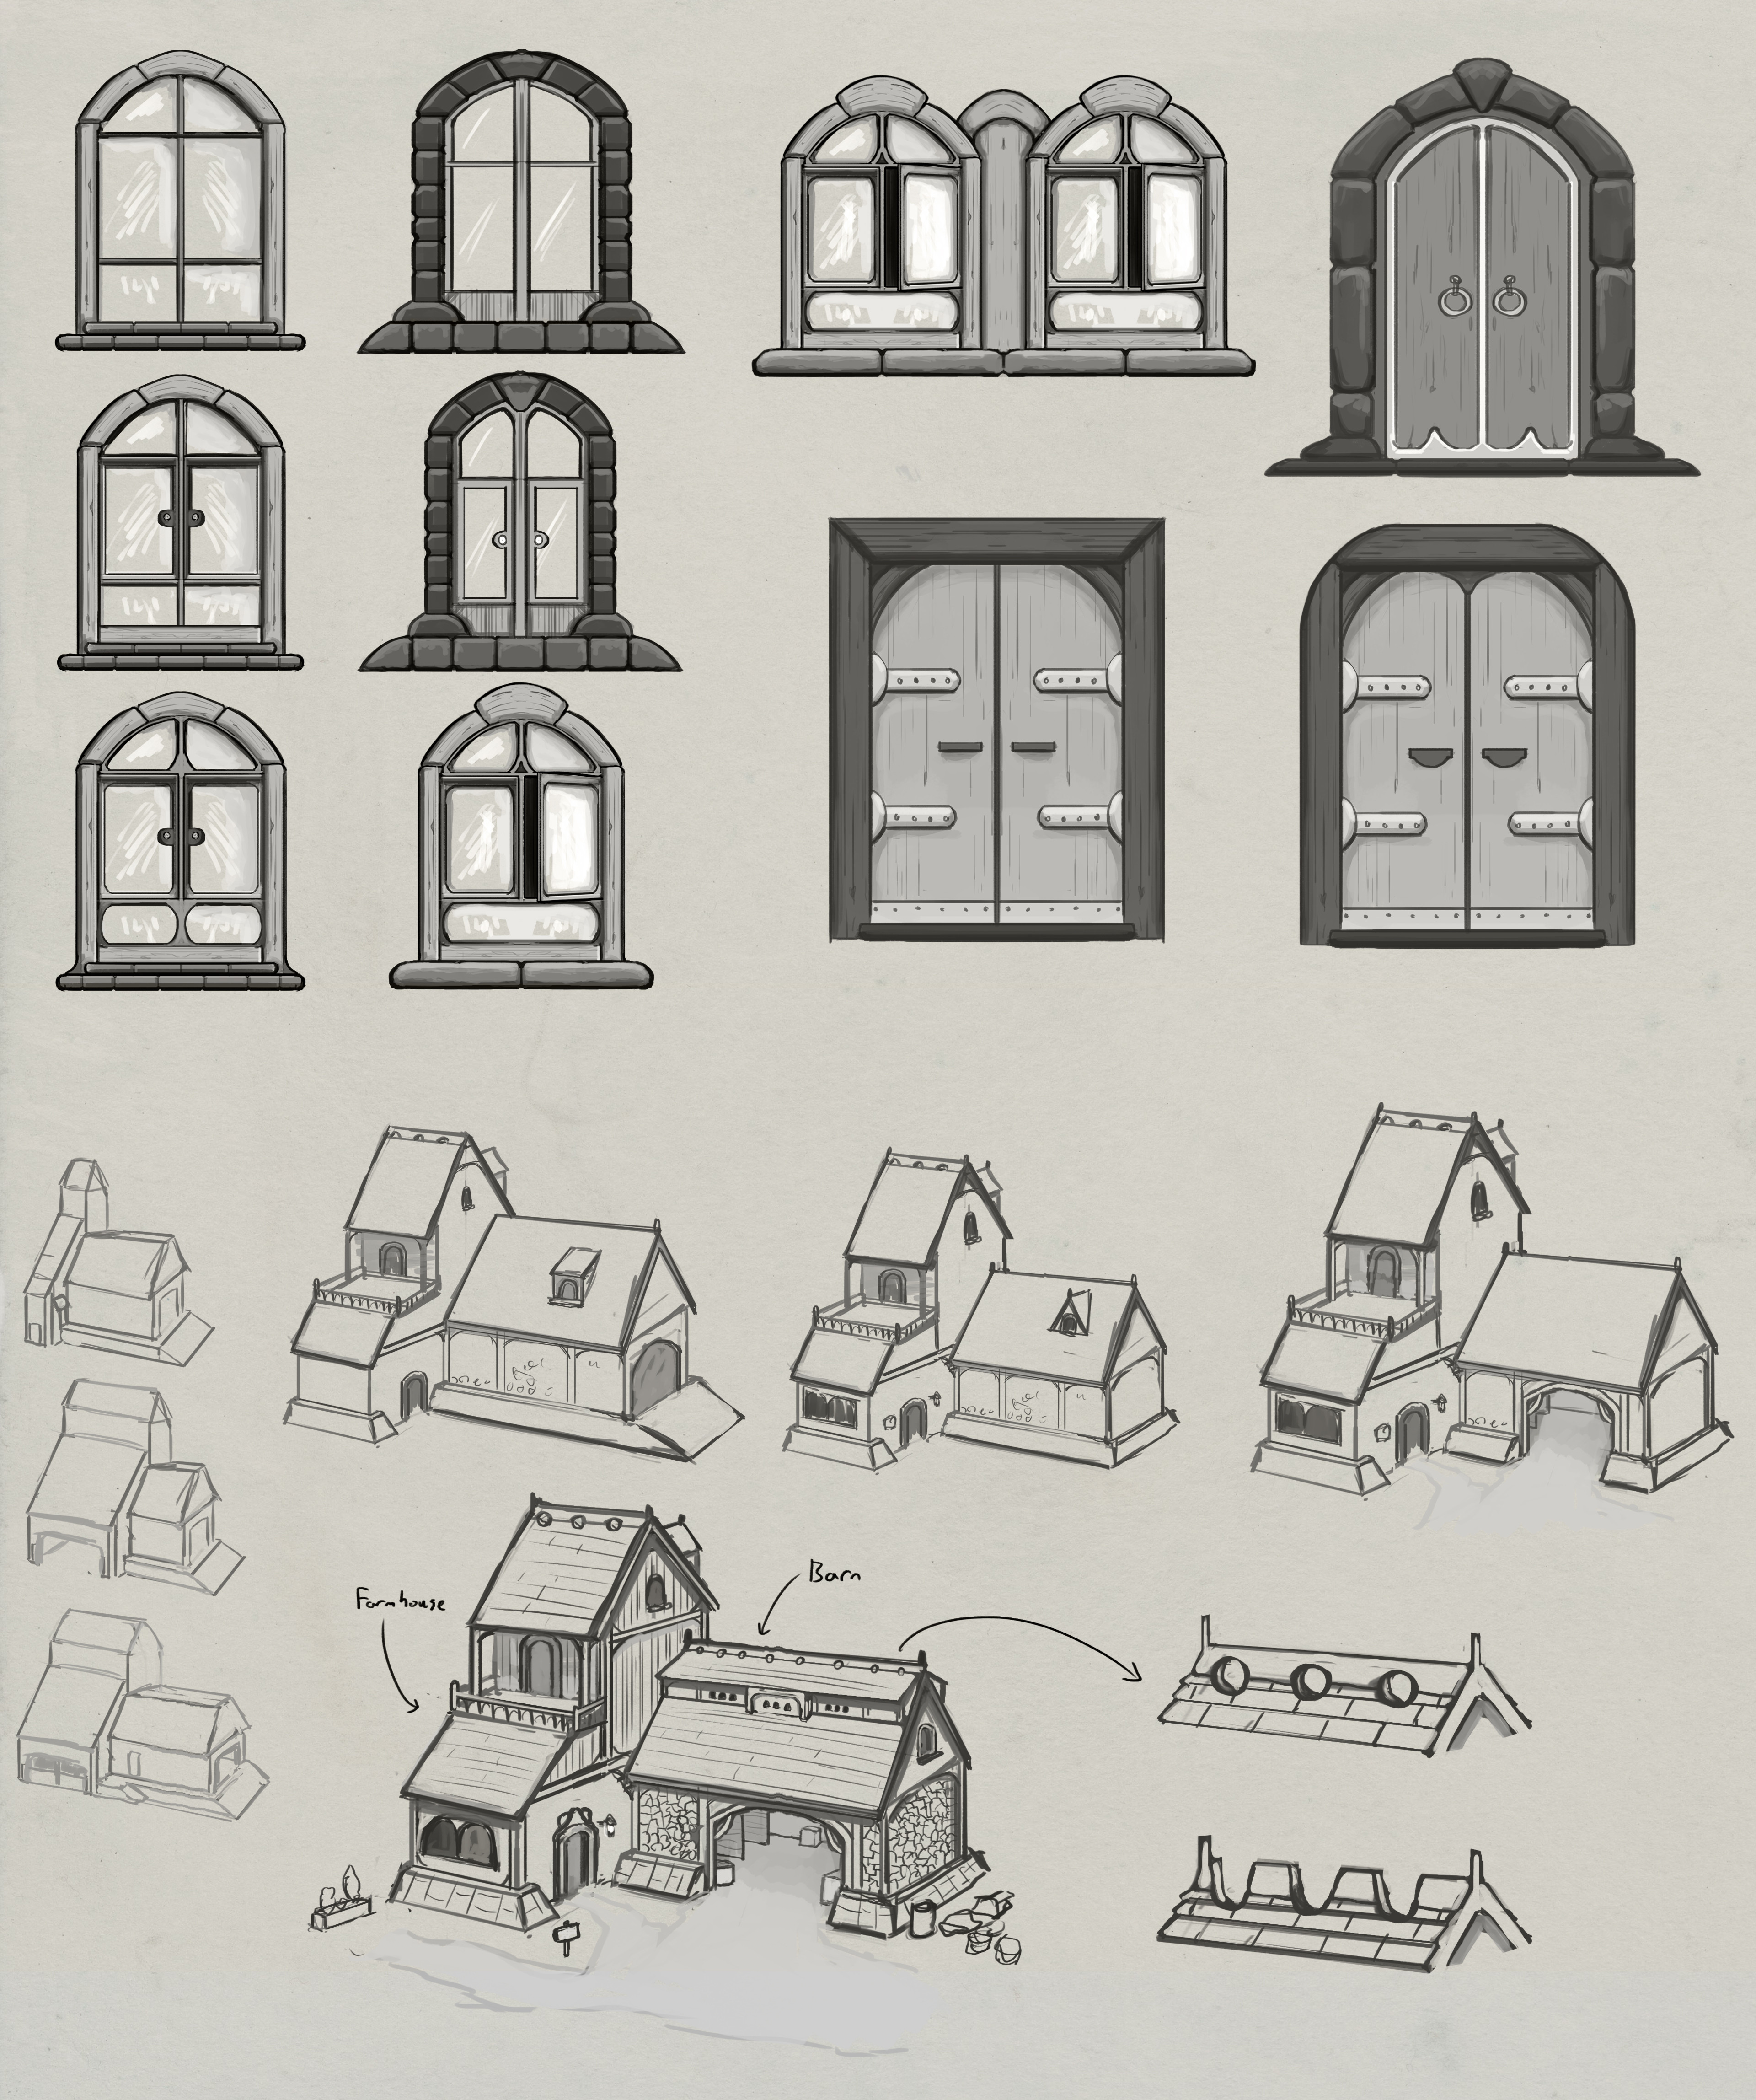 Early sketches of the building itself and some windows and doors. An even earlier sketch was done in a sketchbook.